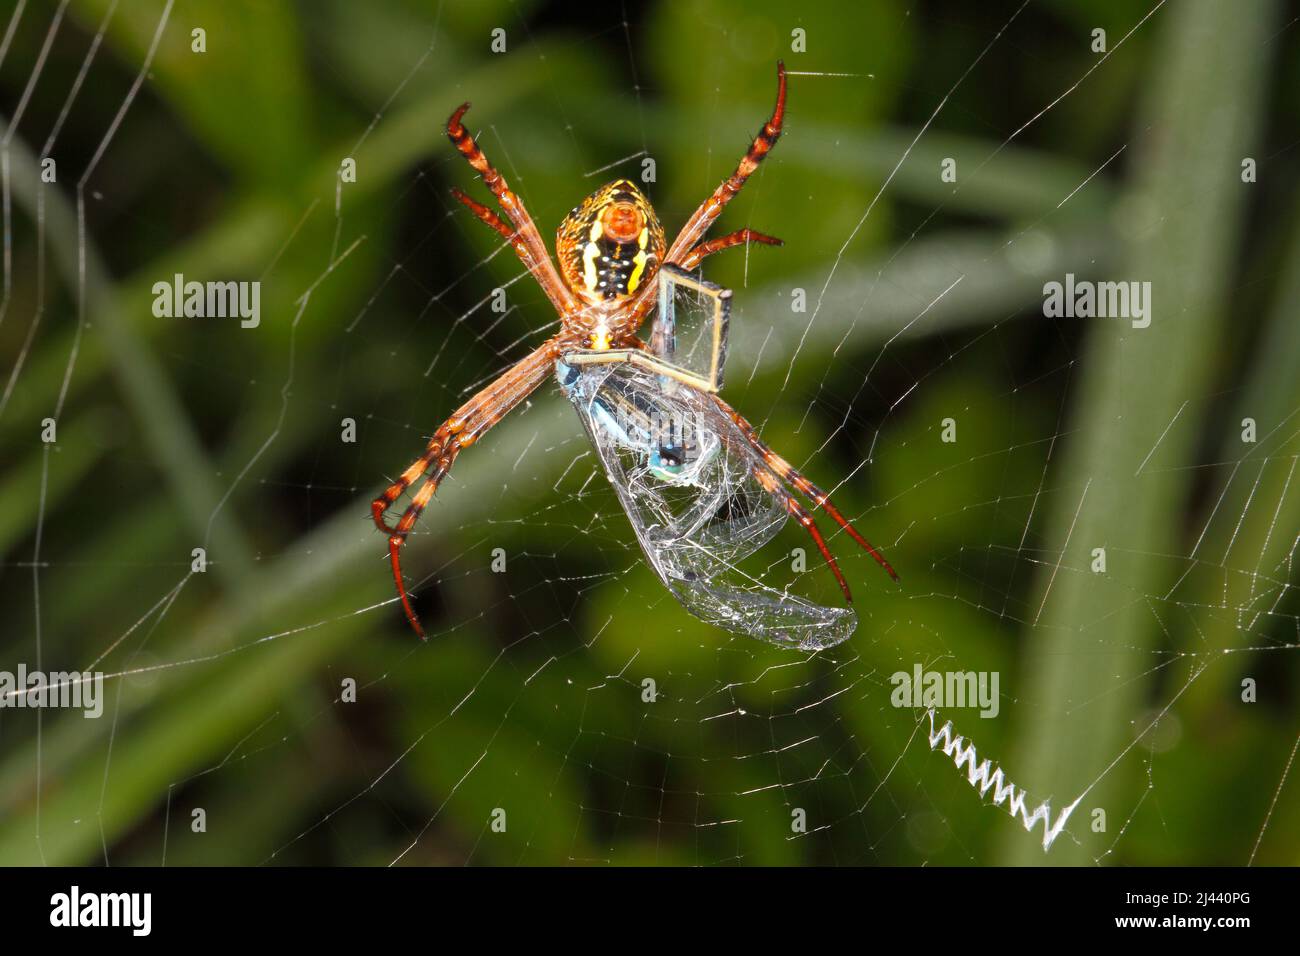 Adult female St Andrews Cross Spider, Argiope keyserlingi, with prey of a male Common Bluetail Damselfly, Ischnura heterosticta. Coffs Harbour, NSW, A Stock Photo